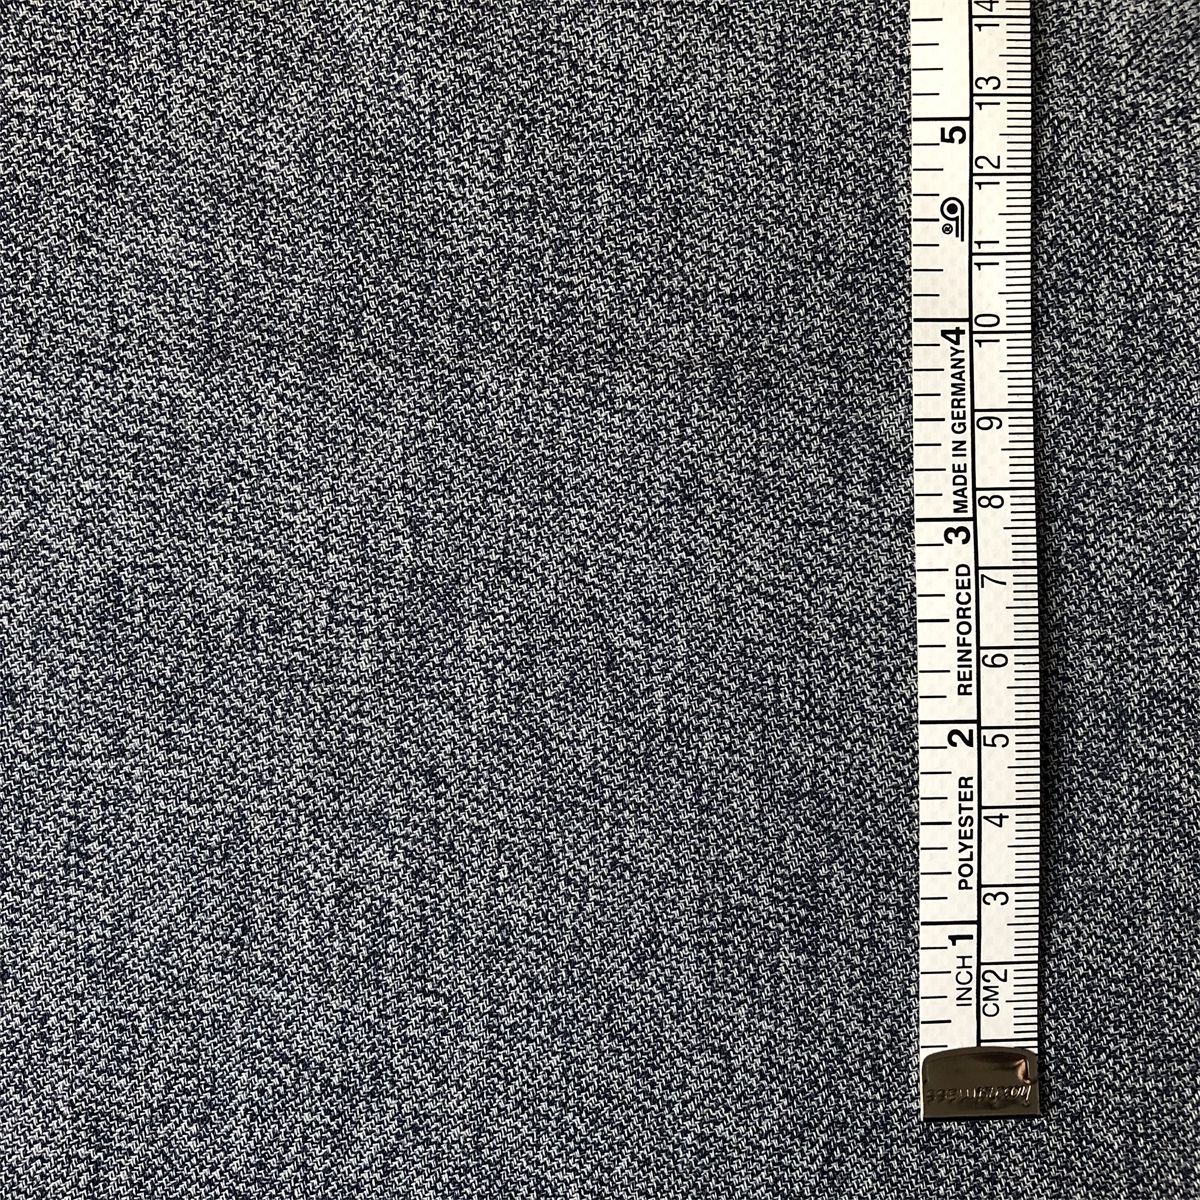 Cotton Yarn Dyed Fabric for men's shirts by mouline yarn 100% cotton yarn dyed twill chambray shirts woven fabric